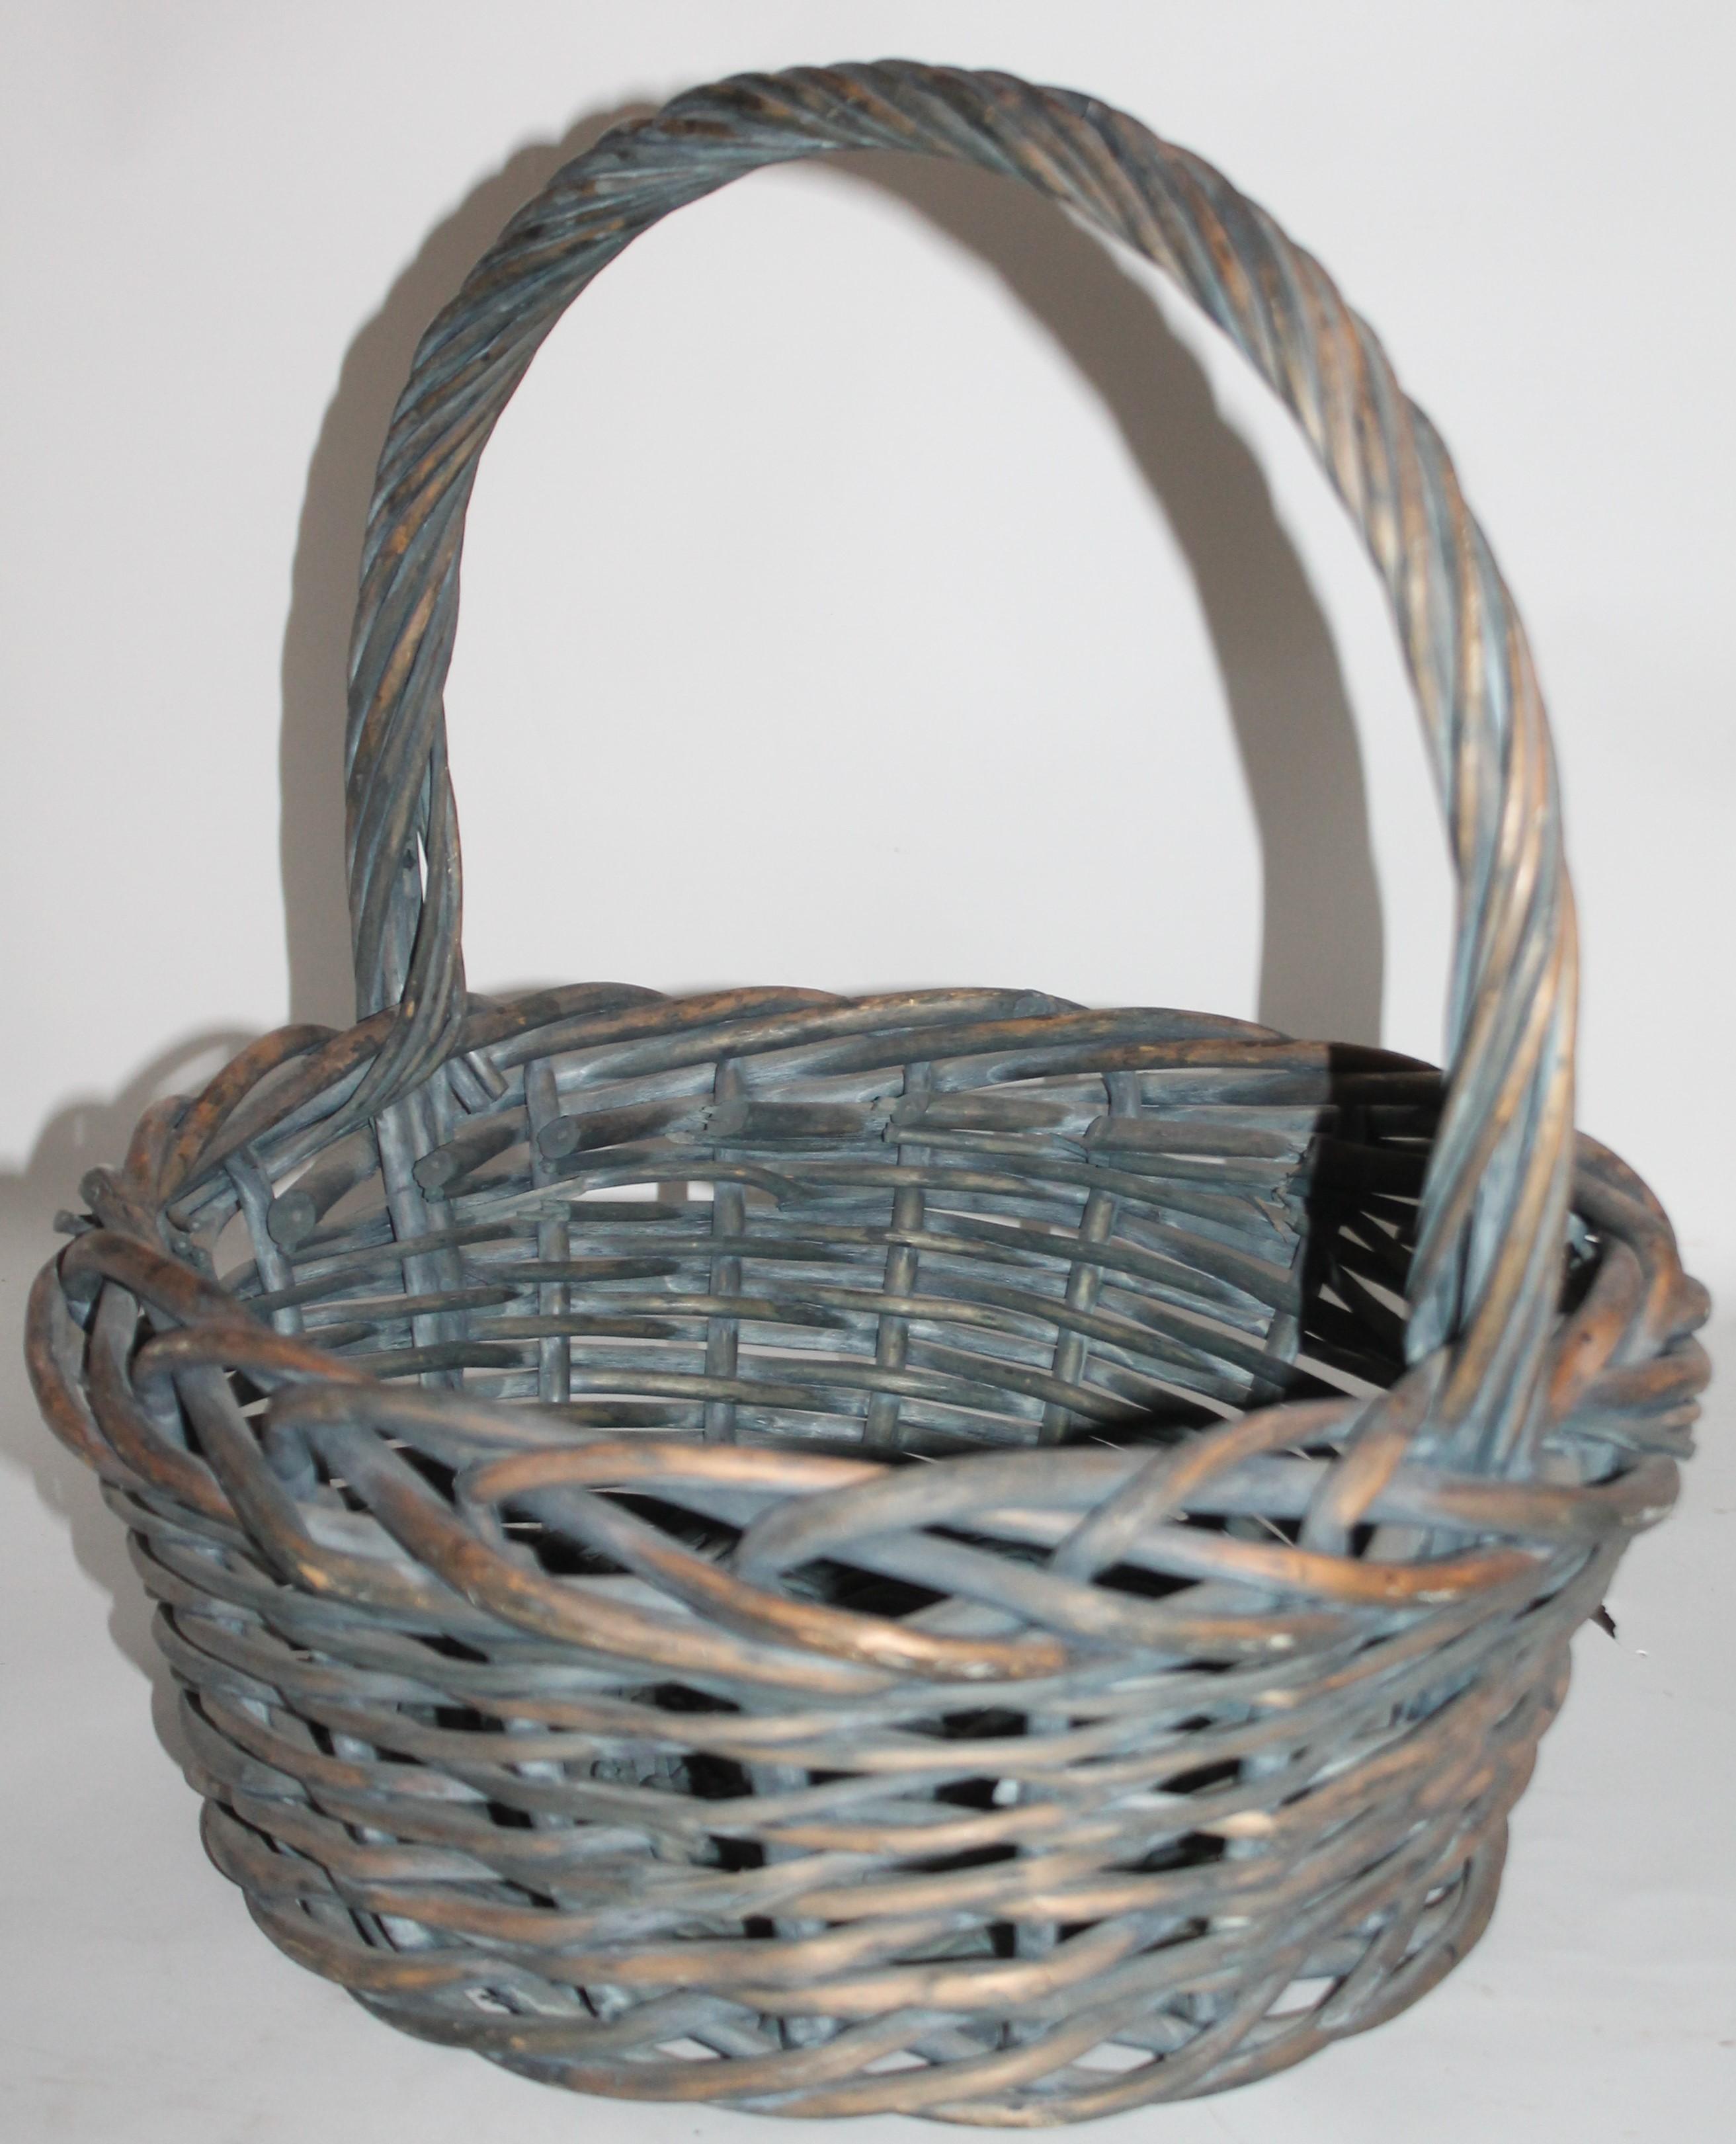 Early 20th century original blue painted handled basket in good condition. Found in the mid west.